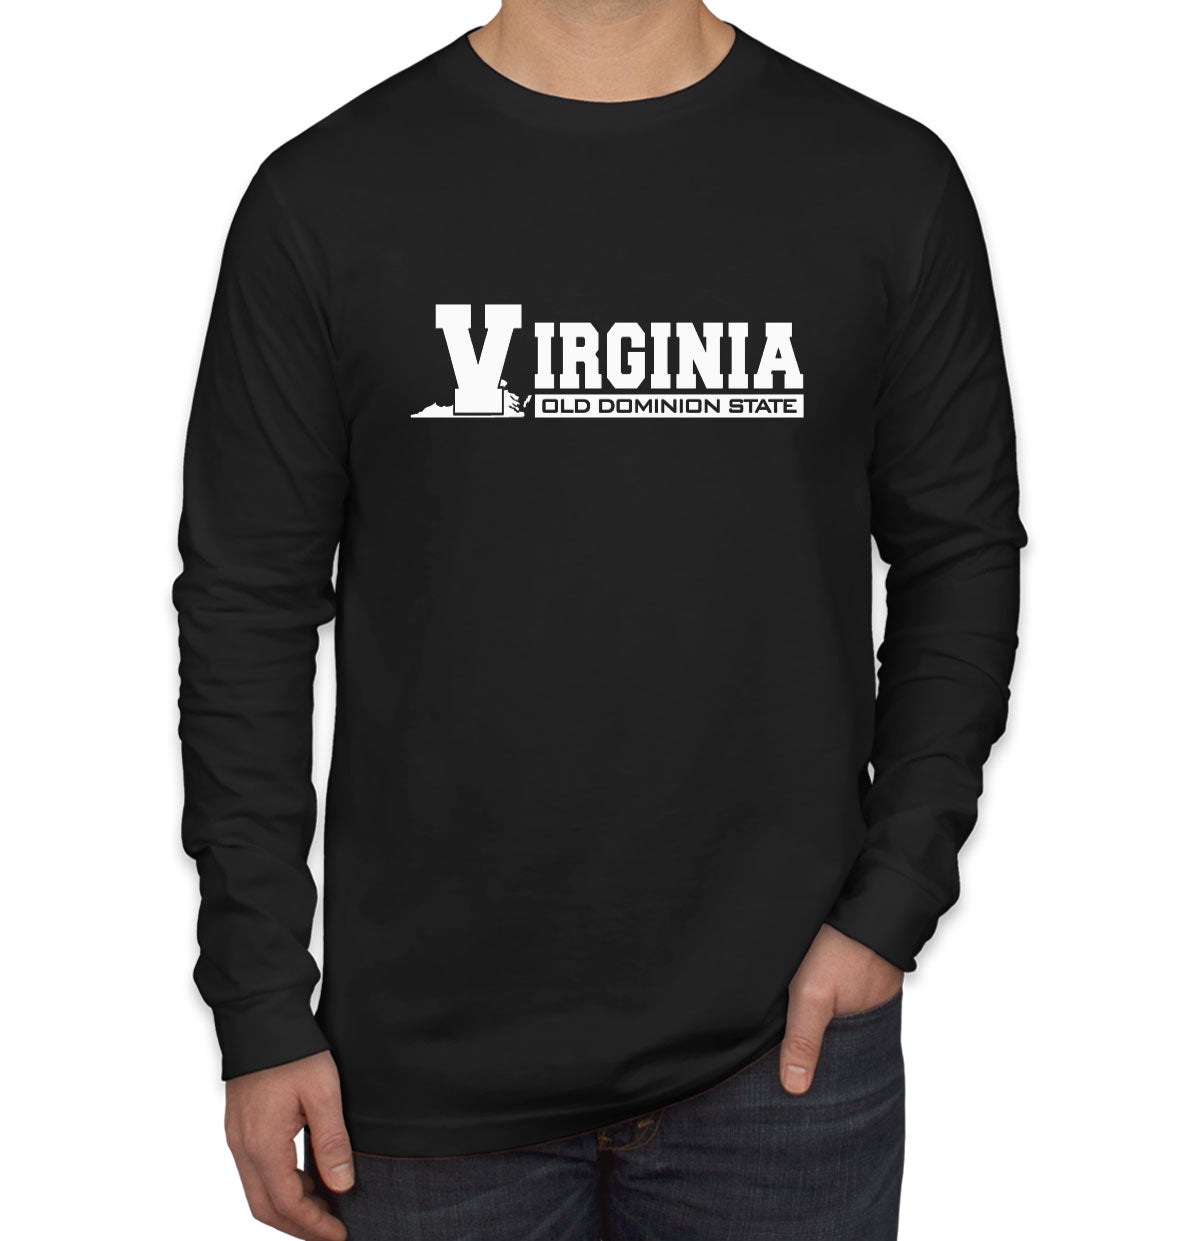 Virginia Old Dominion State Men's Long Sleeve Shirt